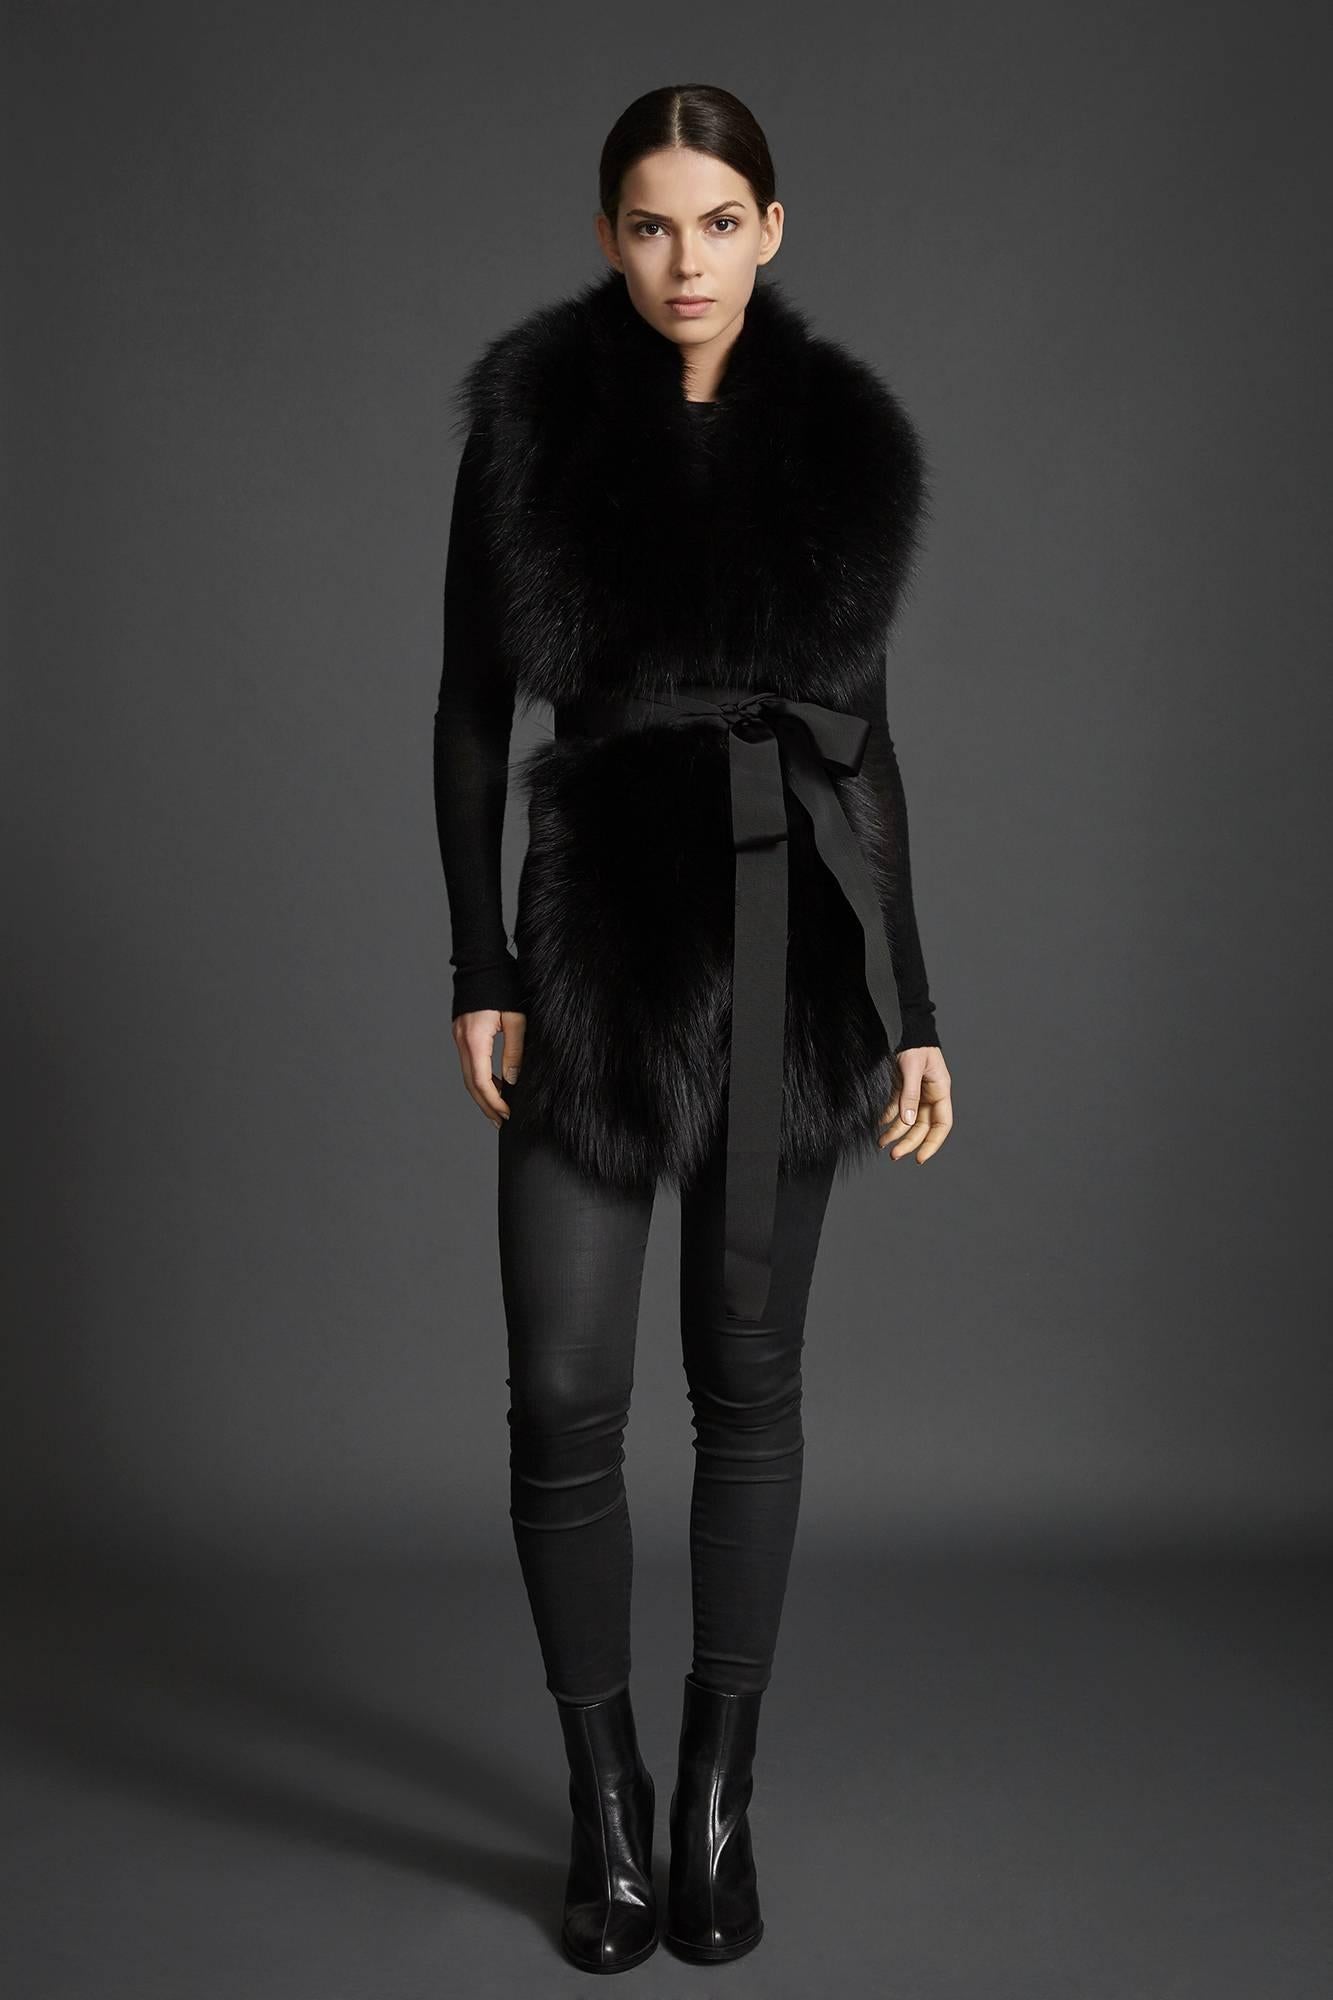 Verheyen London Legacy Black Fox Fur Stole Collar with belt

The Legacy Stole is Verheyen London’s versatile design to be worn from day to night. Crafted in the finest dyed blue fox fur and lined in coloured silk satin.  A structured design to wrap